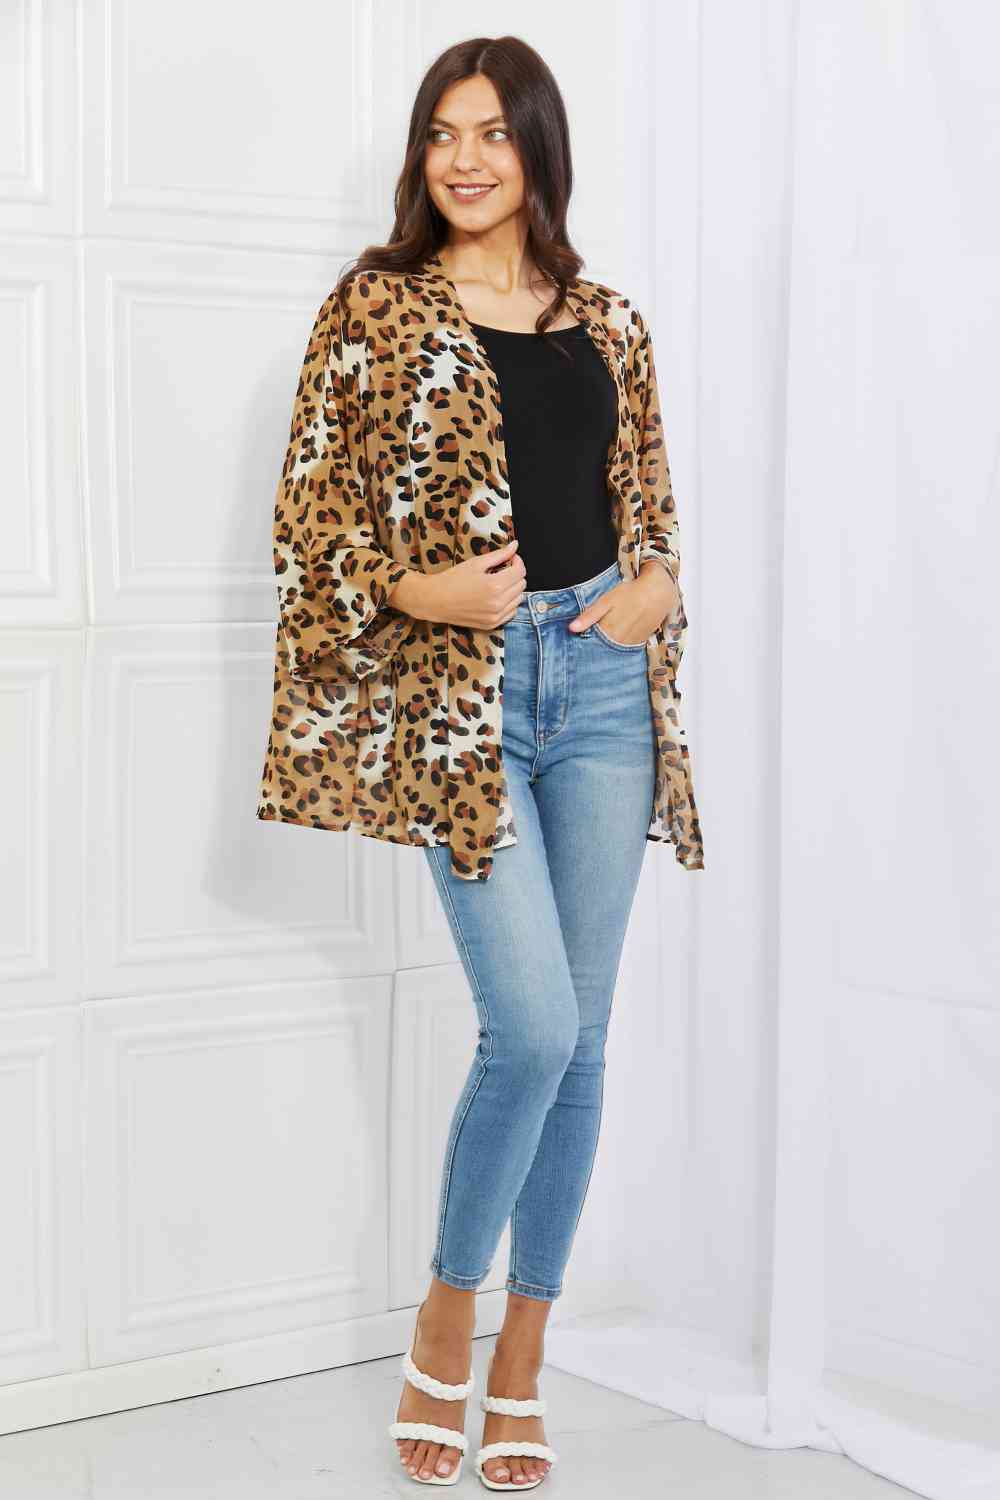 Melody Wild Muse Full Size Animal Print Kimono in Camel coats Krazy Heart Designs Boutique   